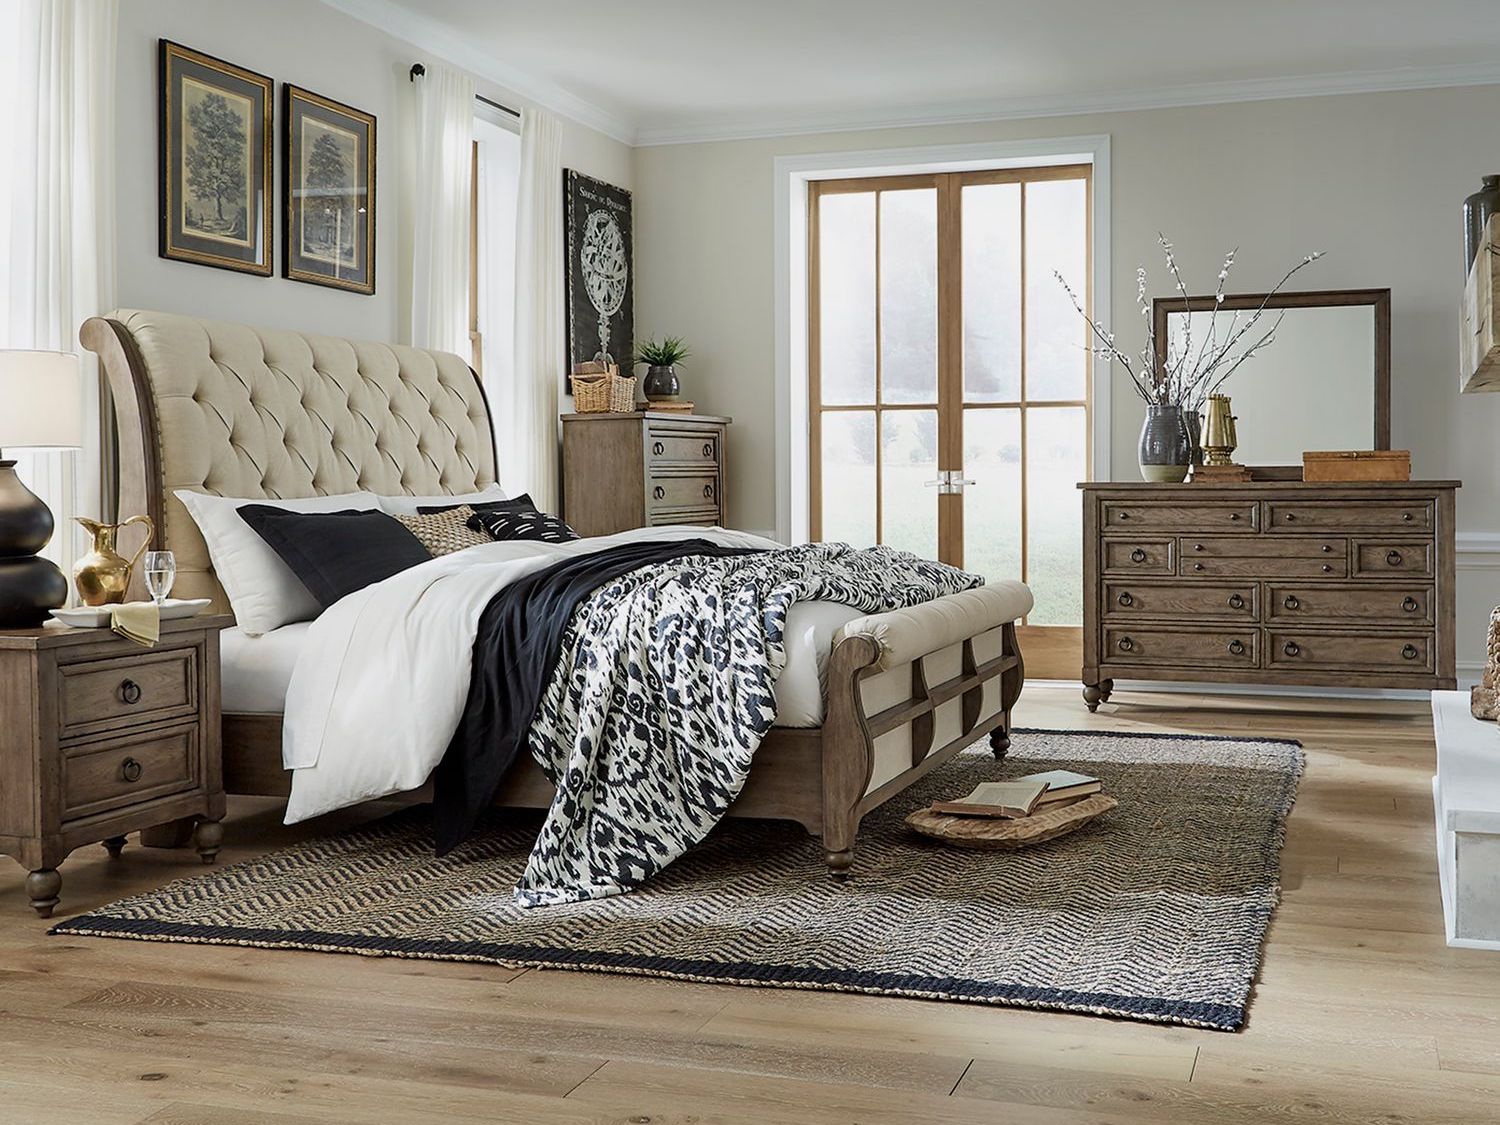 How To Choose The Perfect Bedroom Set